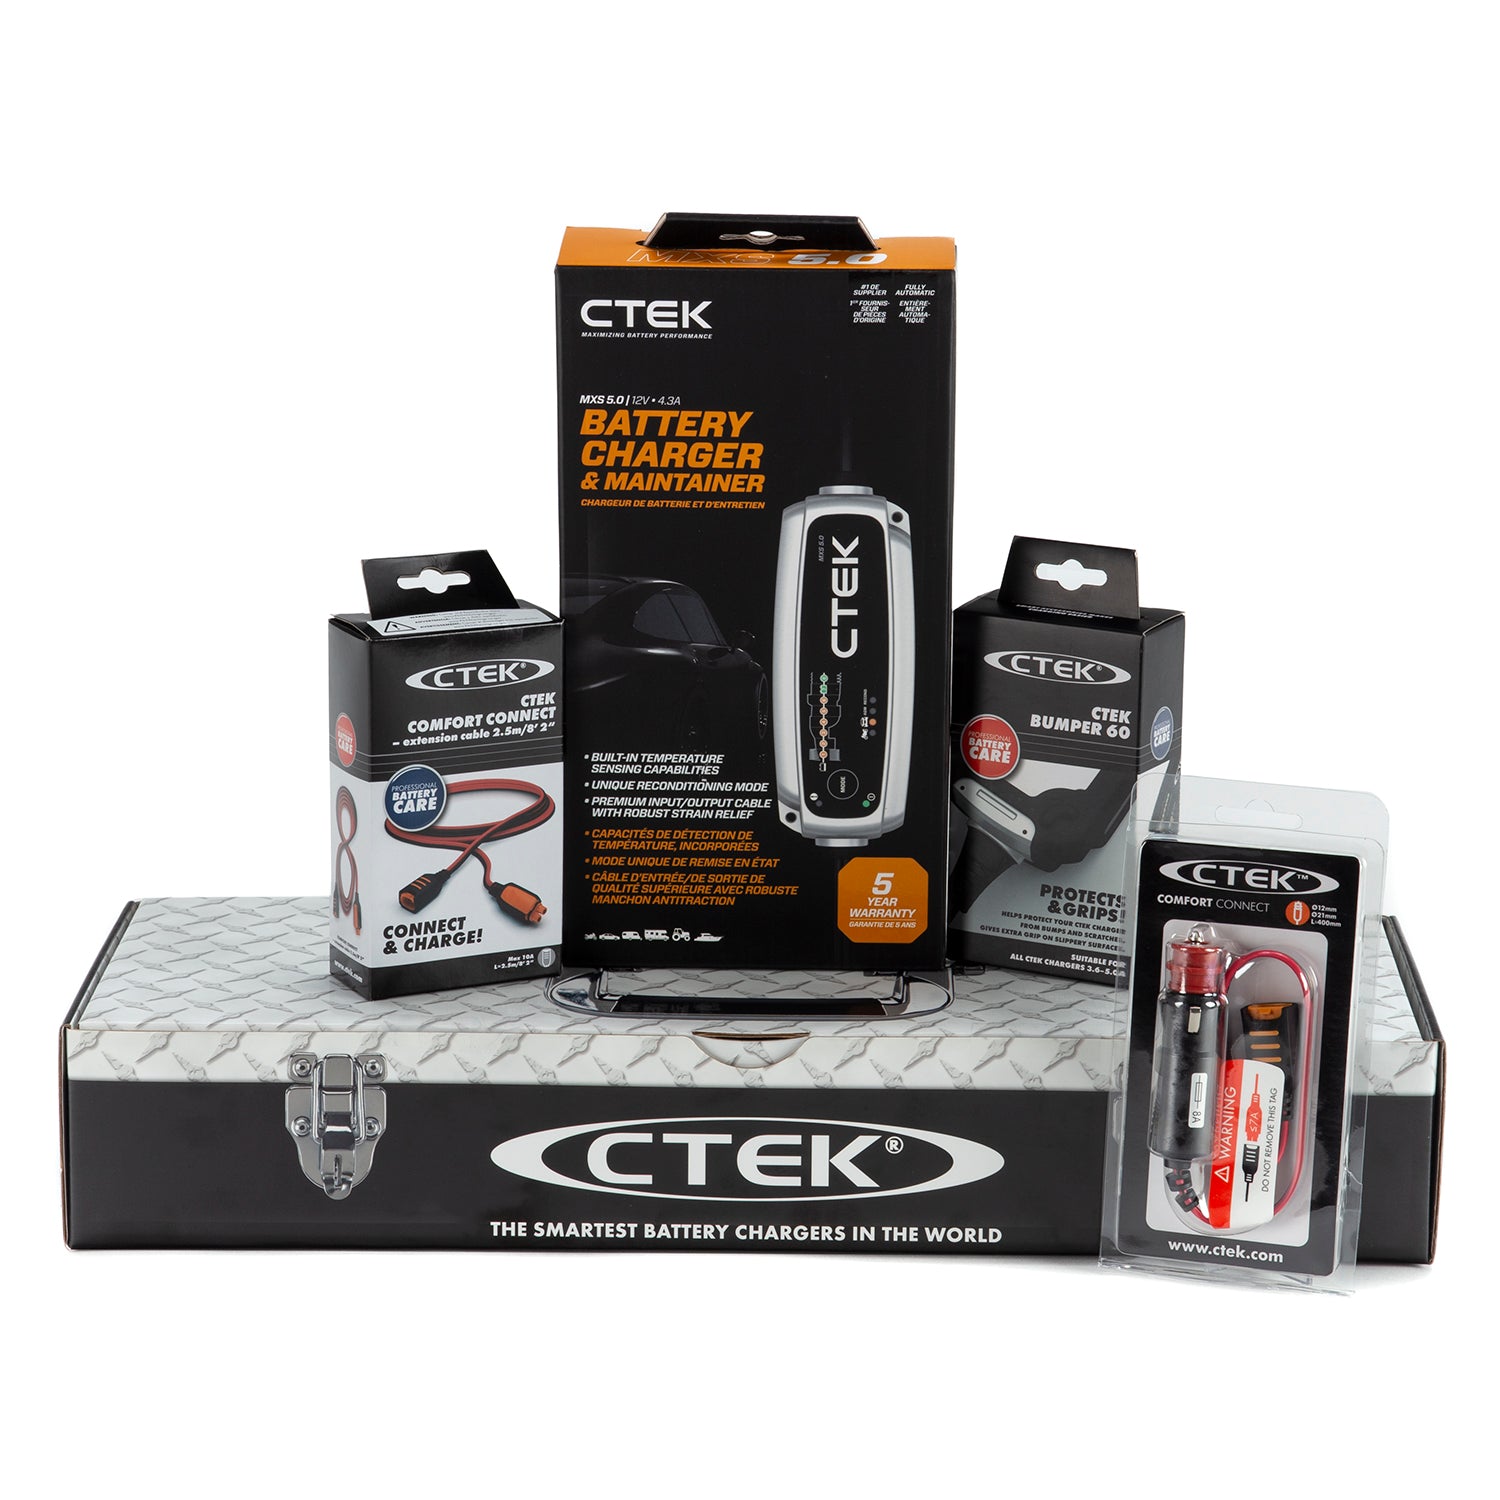 CTEK 40-206 MXS 5.0-12 Volt Battery Charger and Maintainer with 56-915  Black Bumper Accessory